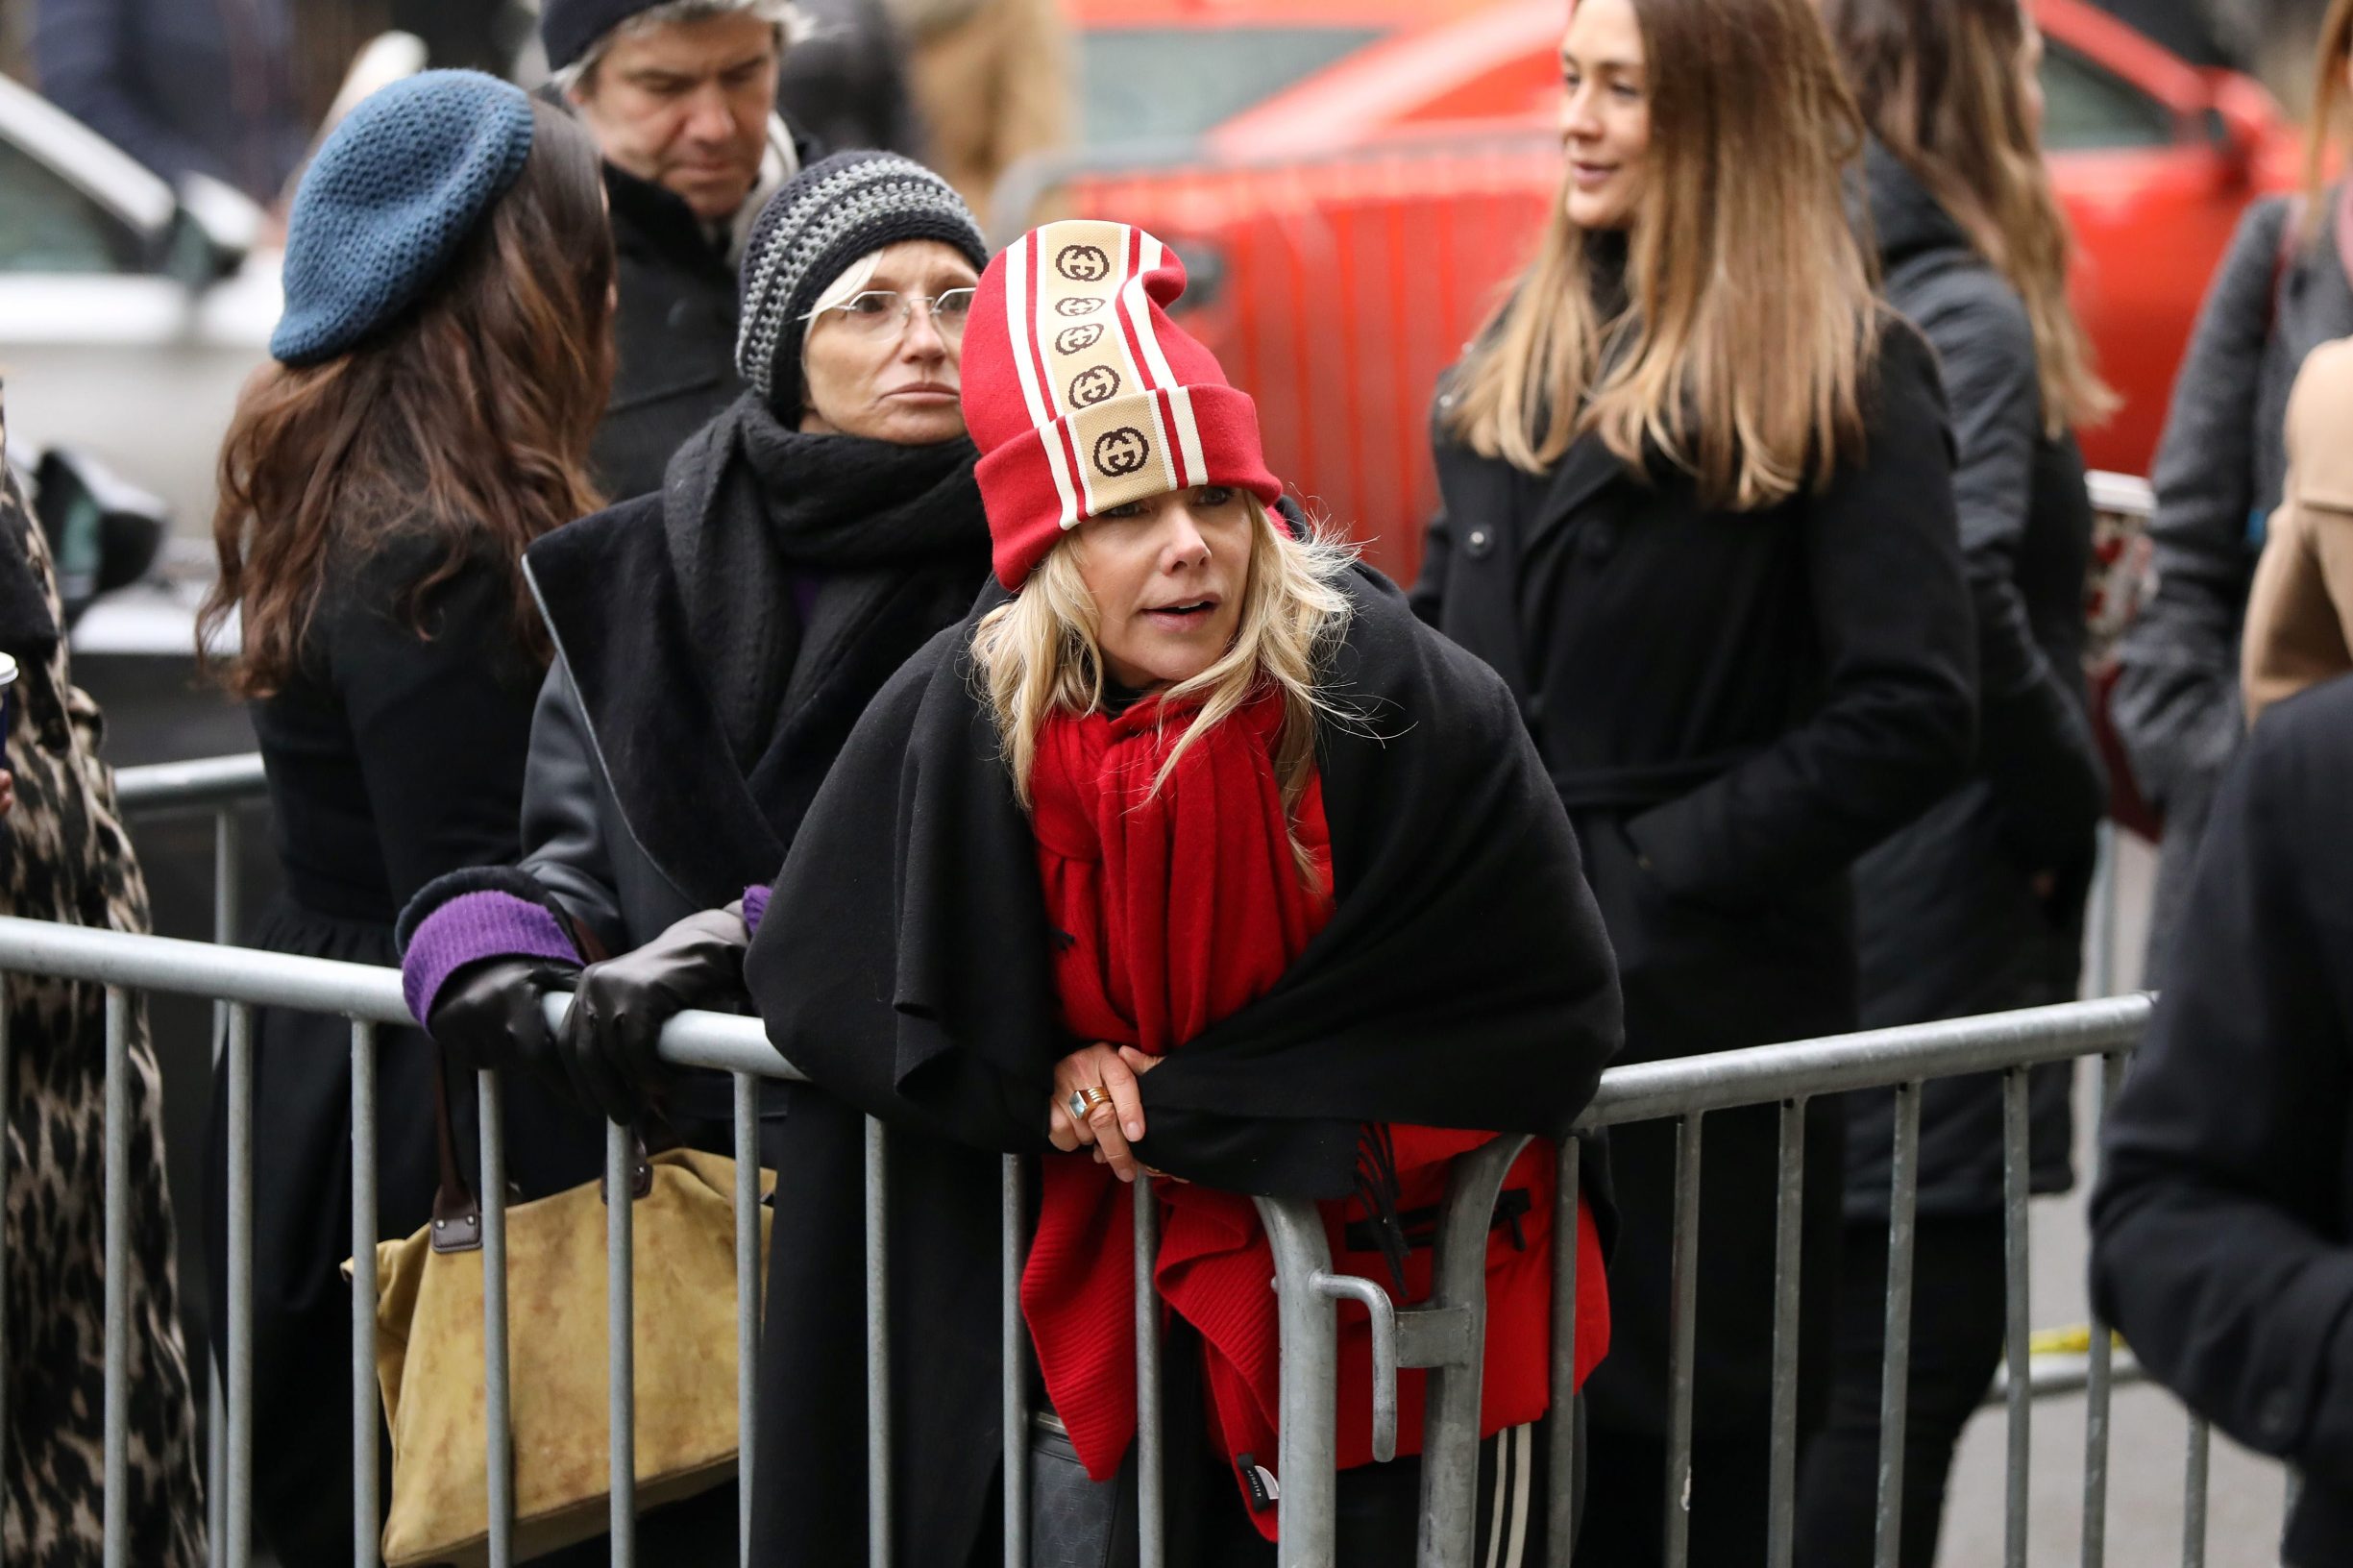 NEW YORK, NEW YORK - JANUARY 06: Actress Rosanna Arquette joins other accusers and protesters as Harvey Weinstein arrives at a Manhattan court house for the start of his trial on January 06, 2020 in New York City. Weinstein, a movie producer whose alleged sexual misconduct helped spark the #MeToo movement, pleaded not-guilty on five counts of rape and sexual assault against two unnamed women and faces a possible life sentence in prison.   Spencer Platt/Getty Images/AFP
== FOR NEWSPAPERS, INTERNET, TELCOS & TELEVISION USE ONLY ==